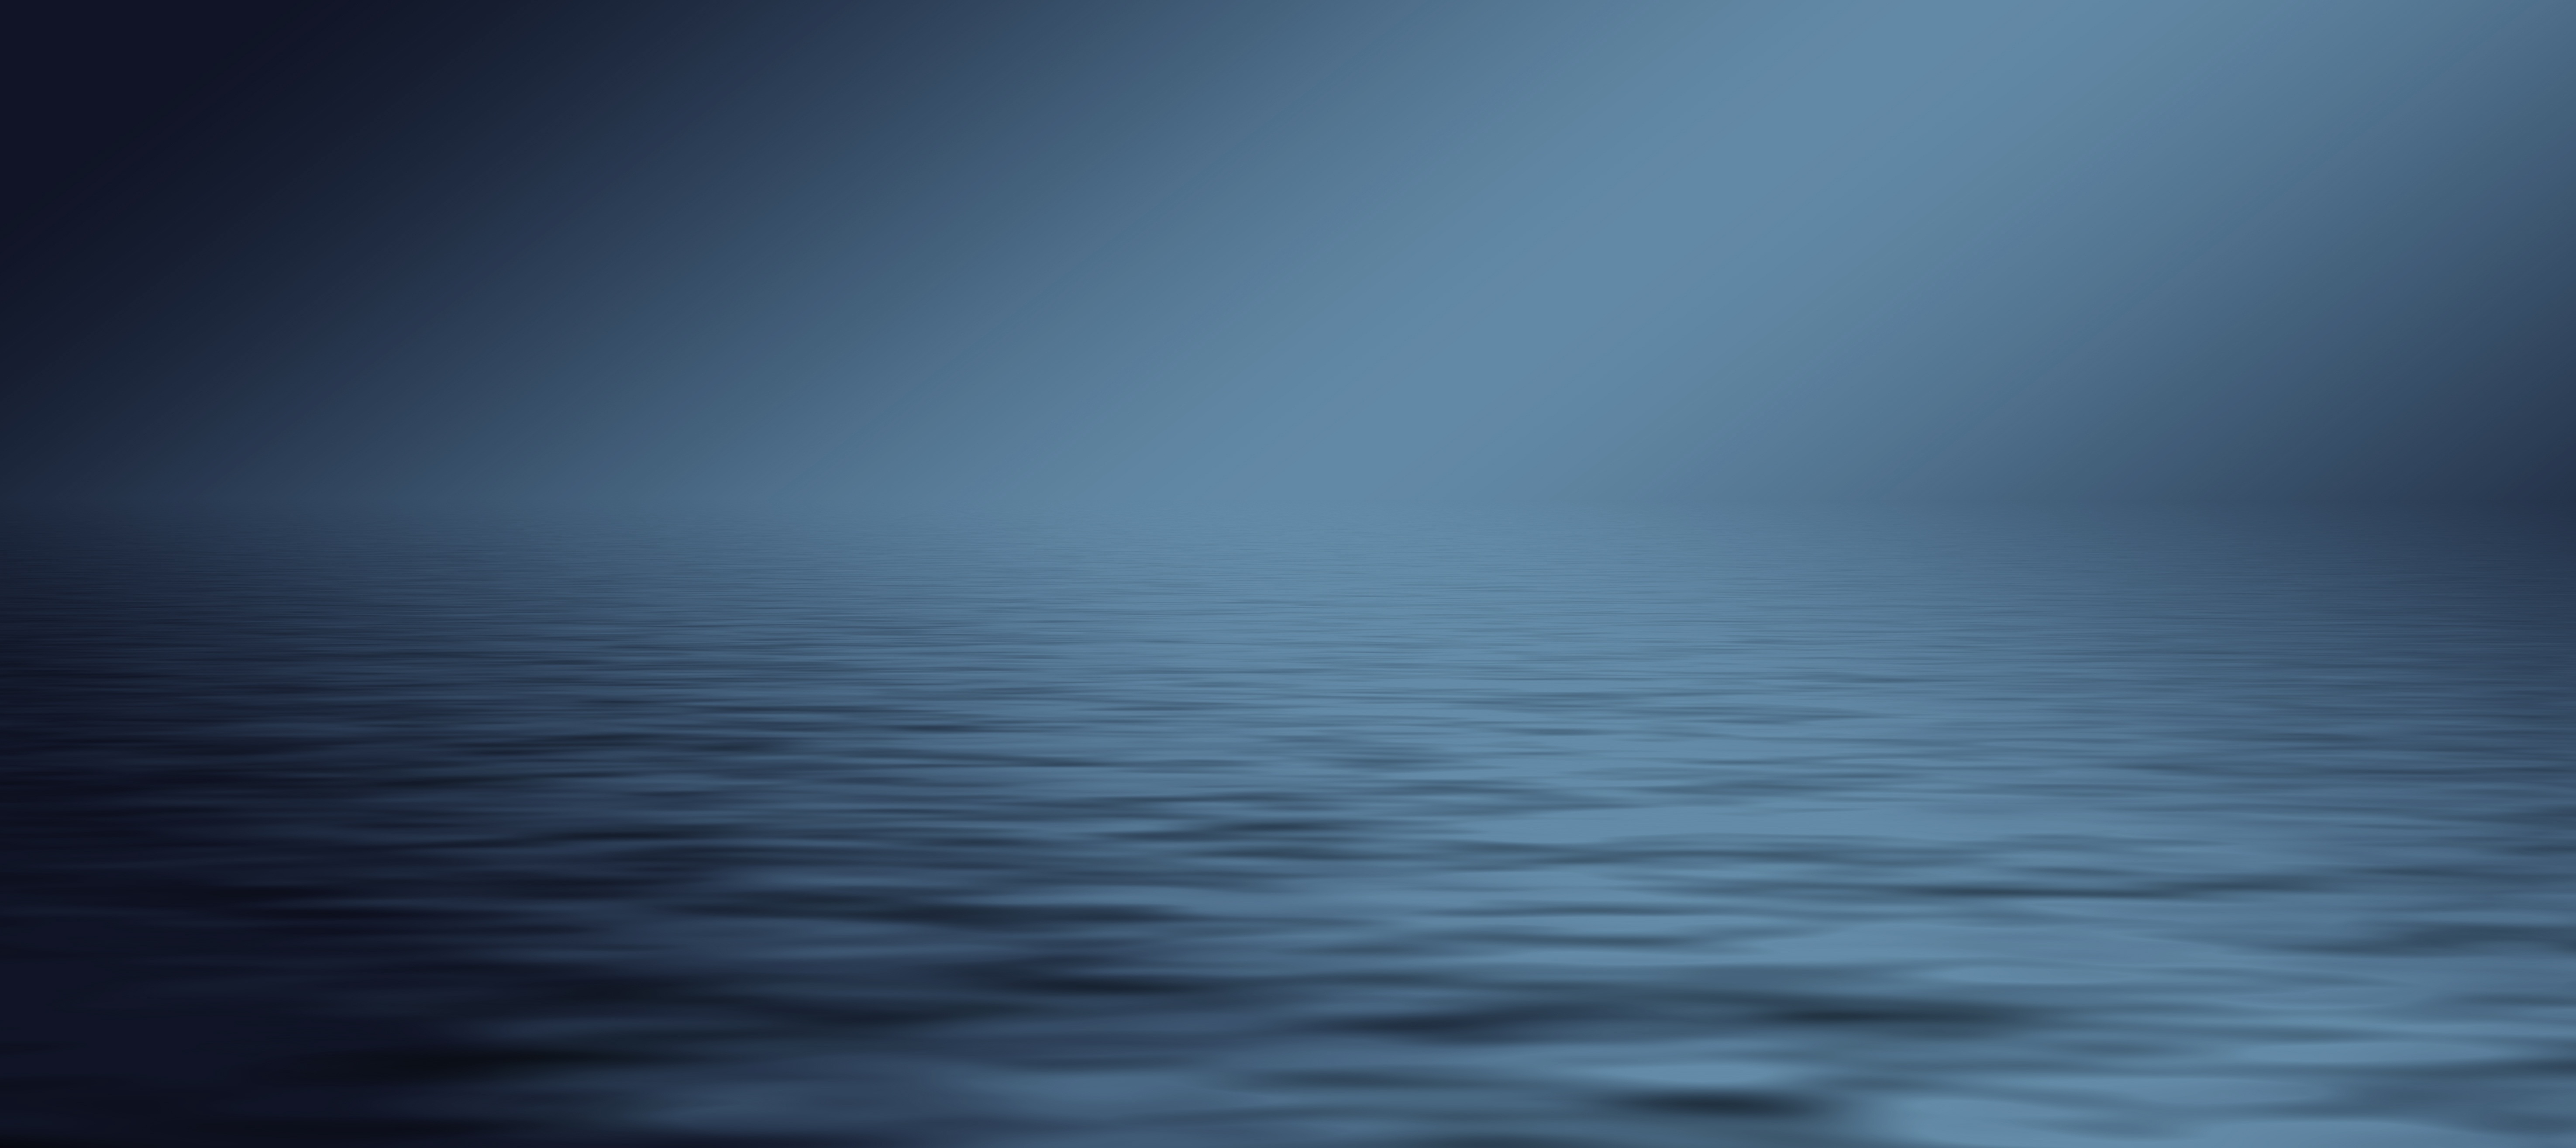 84475 download wallpaper minimalism, grey, sea, horizon screensavers and pictures for free